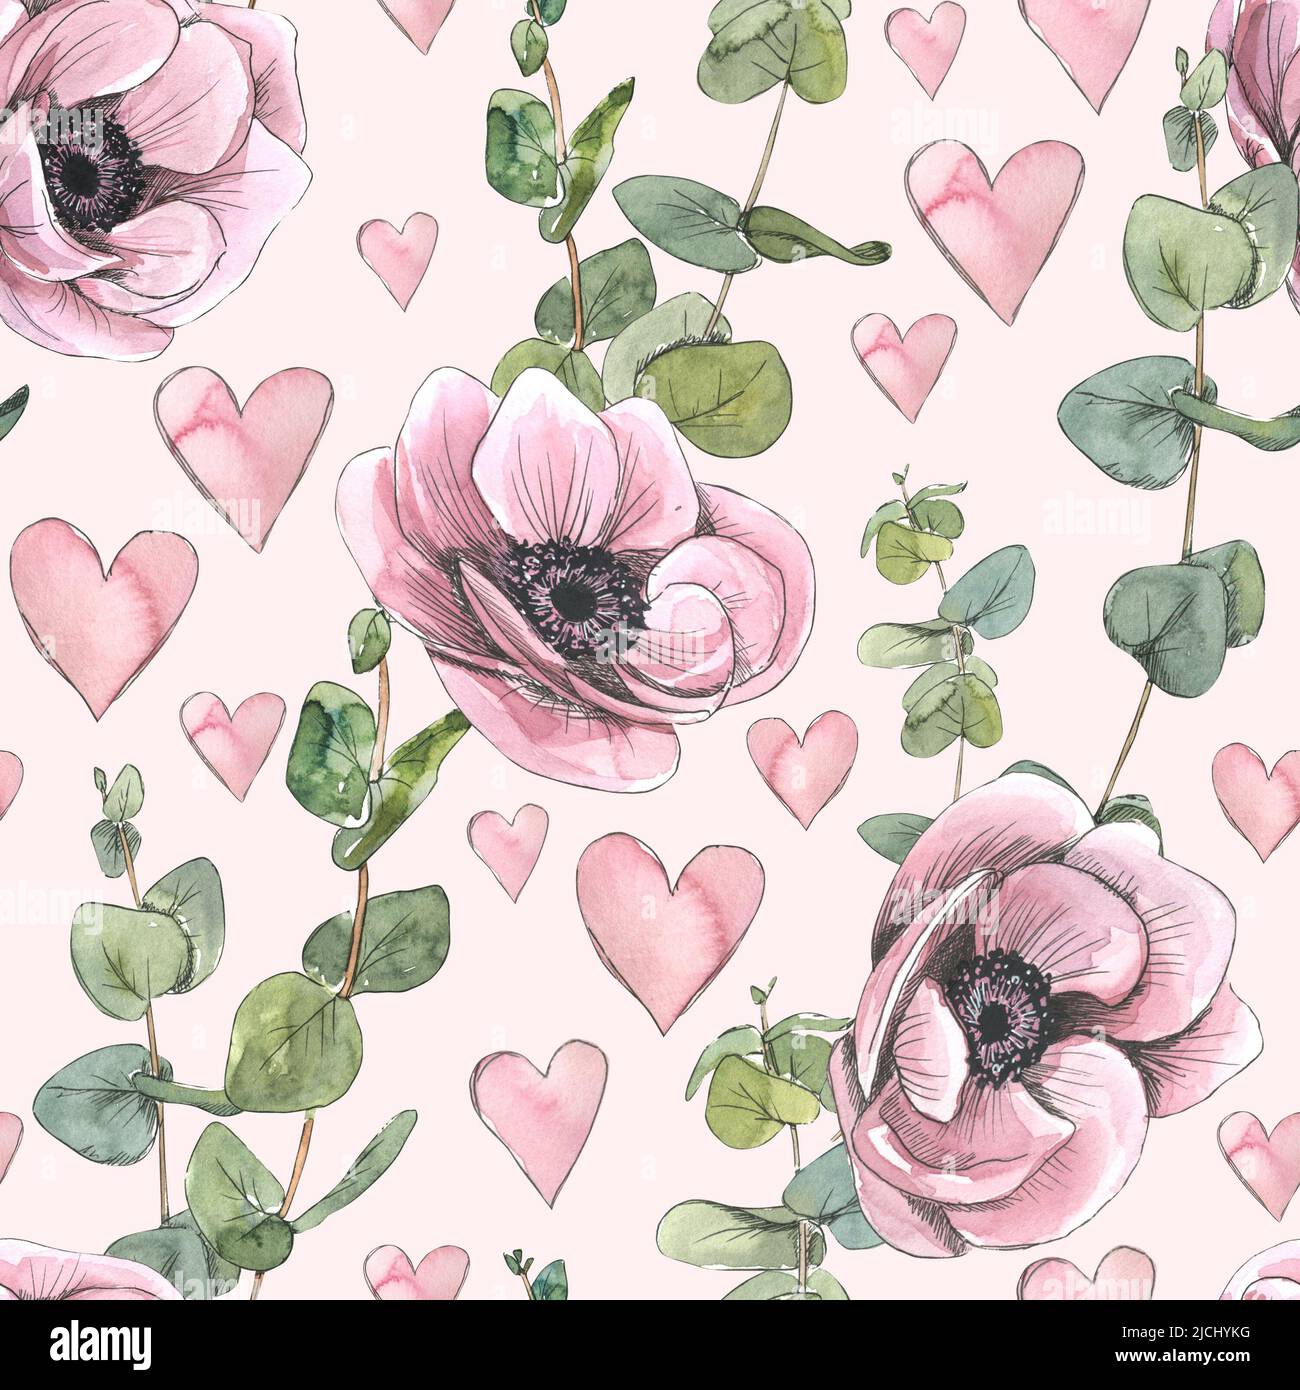 Lilac anemones with eucalyptus twigs and pink hearts. Watercolor illustration in sketch style. Seamless pattern from a large set of PARIS. For fabric, Stock Photo